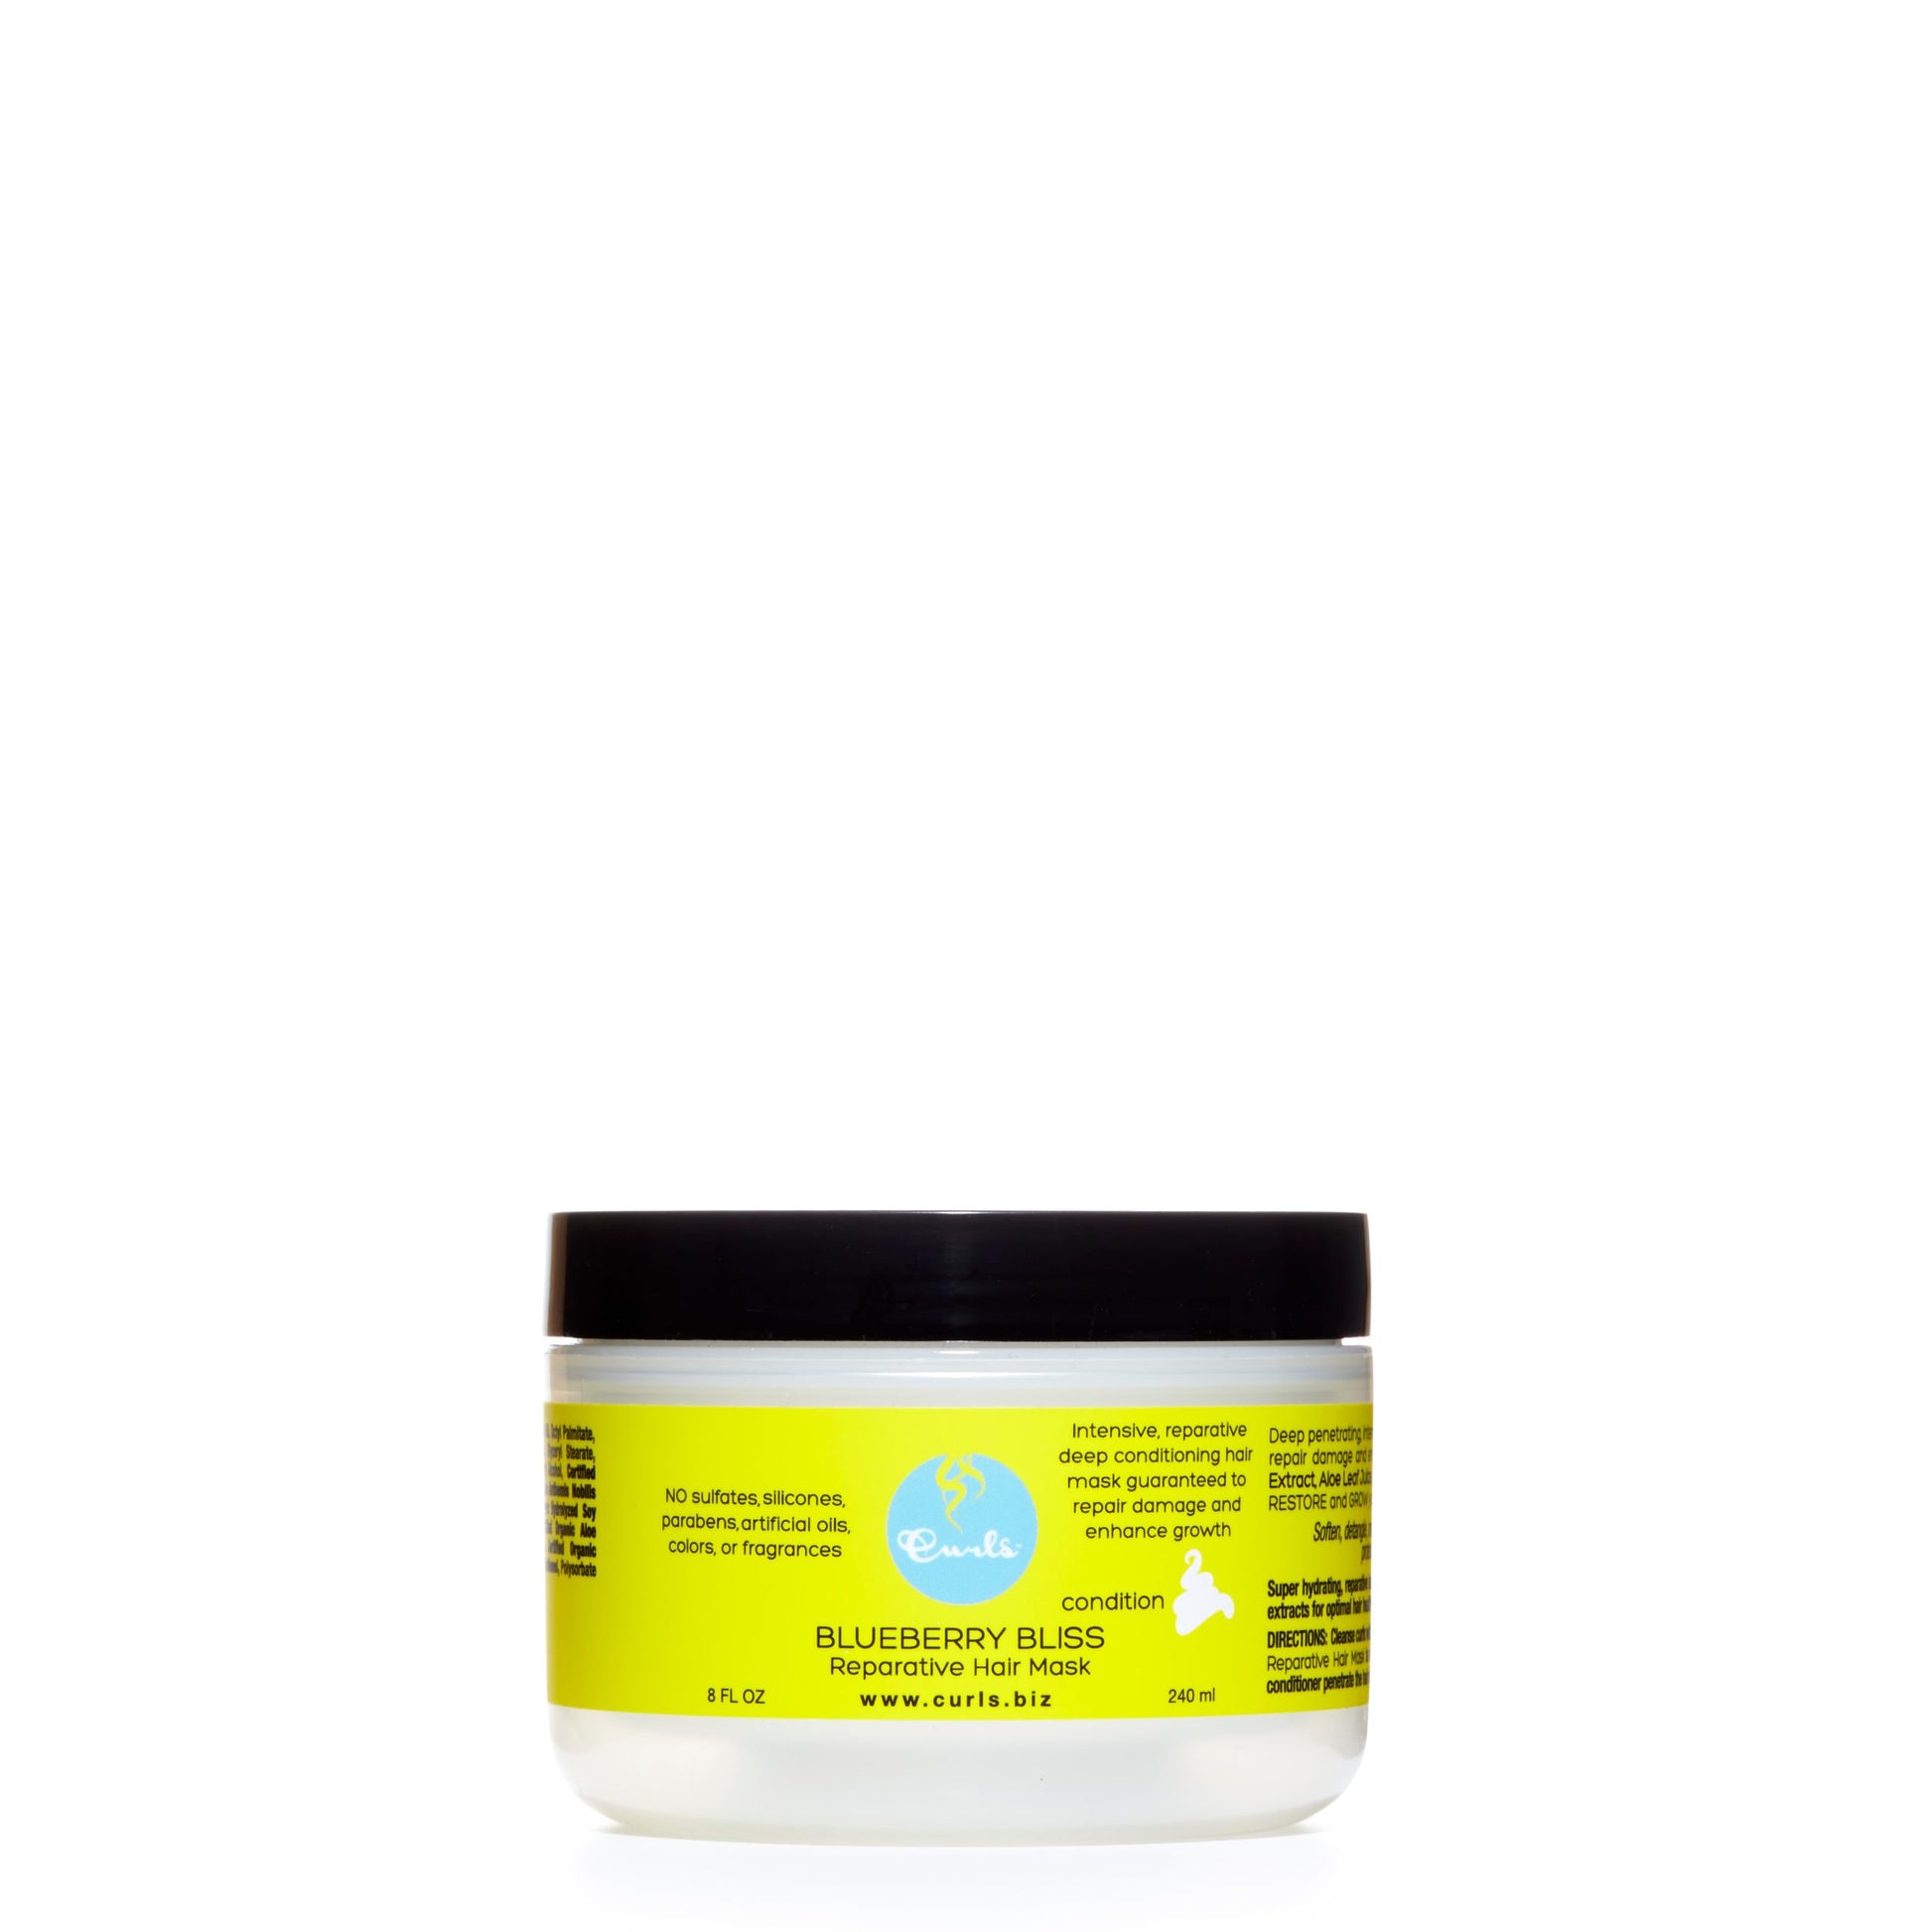 Curls Blueberry Bliss Reparative Hair Mask Beauty Supply store, all natural products for women, men, and kids. The wh shop is the sephora for black owned brands